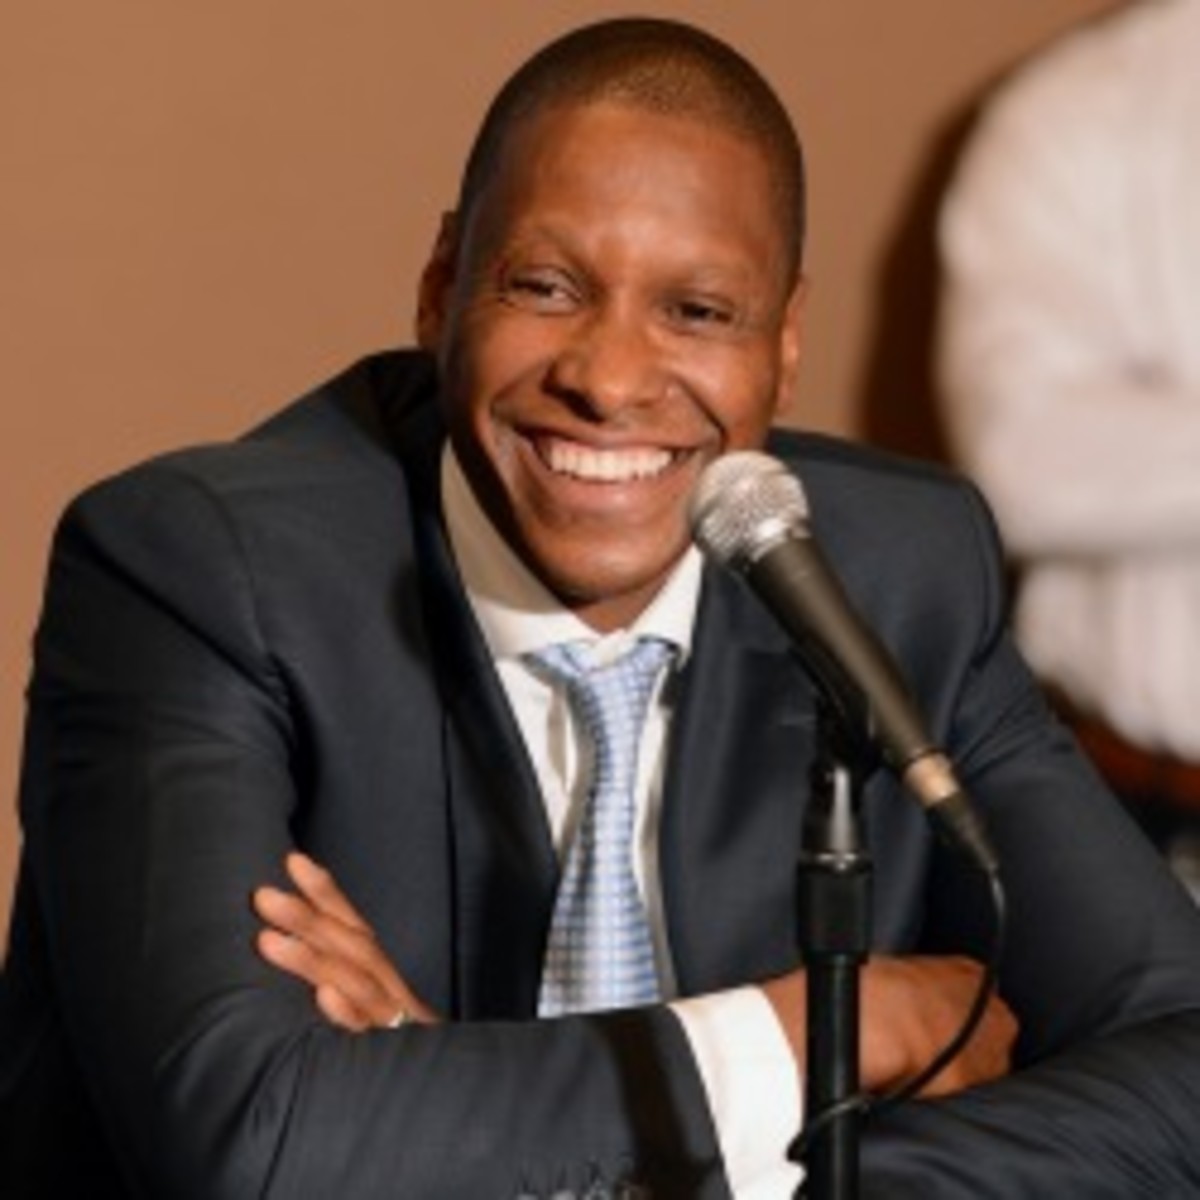 Nuggets general manager Masai Ujiri will be named executive of the year. (Photo by Garrett W. Ellwood/NBAE via Getty Images)